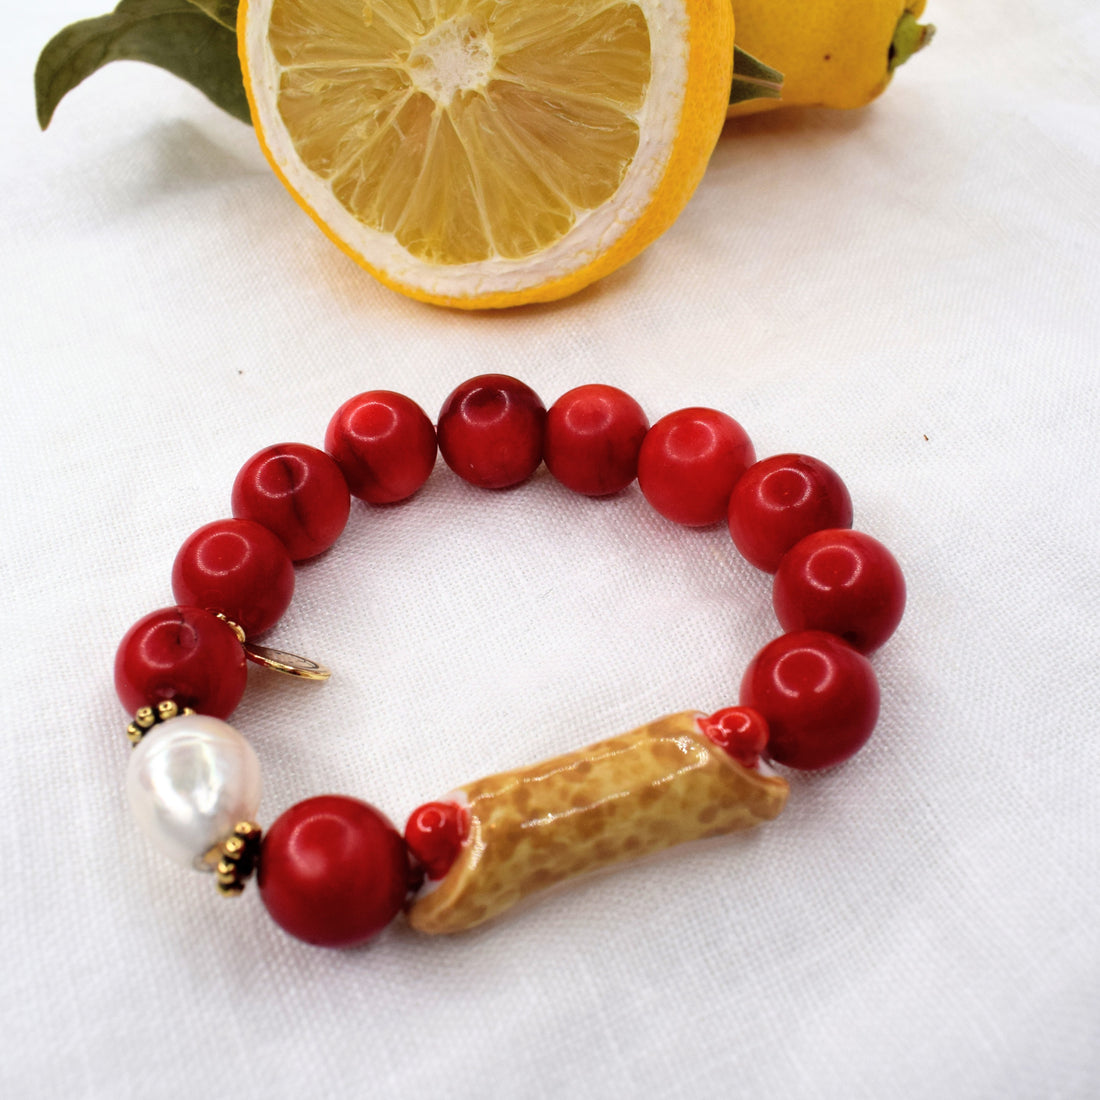 Red Coral with Hanpainted Cannoli - Oriana Lamarca LLC